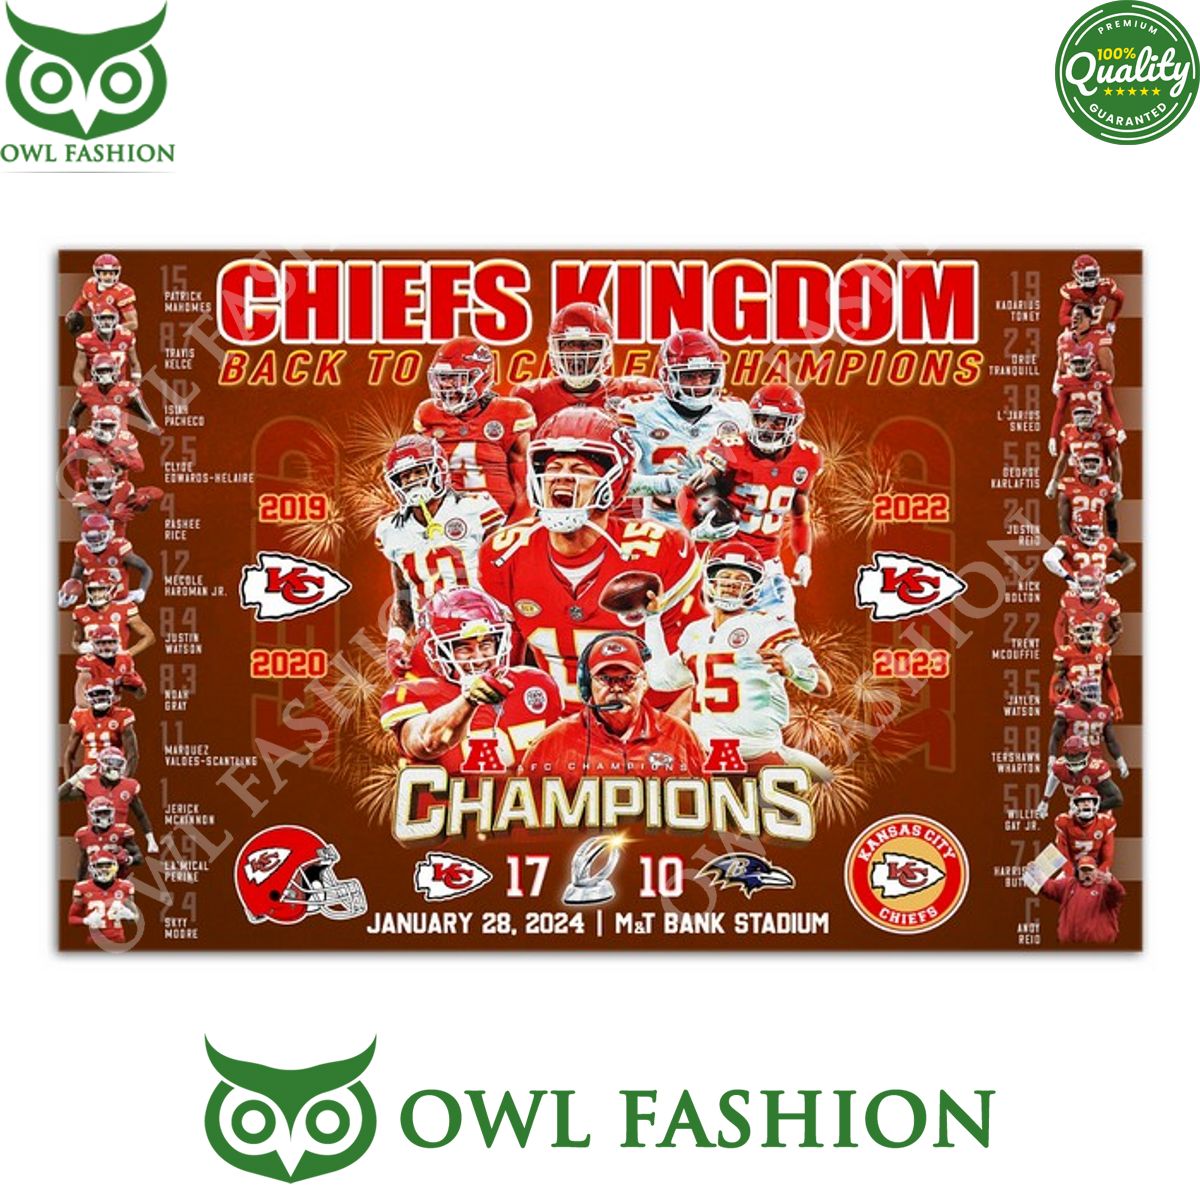 kansas city chiefs kingdom back to champions 4th time victory poster 1 EOUeR.jpg